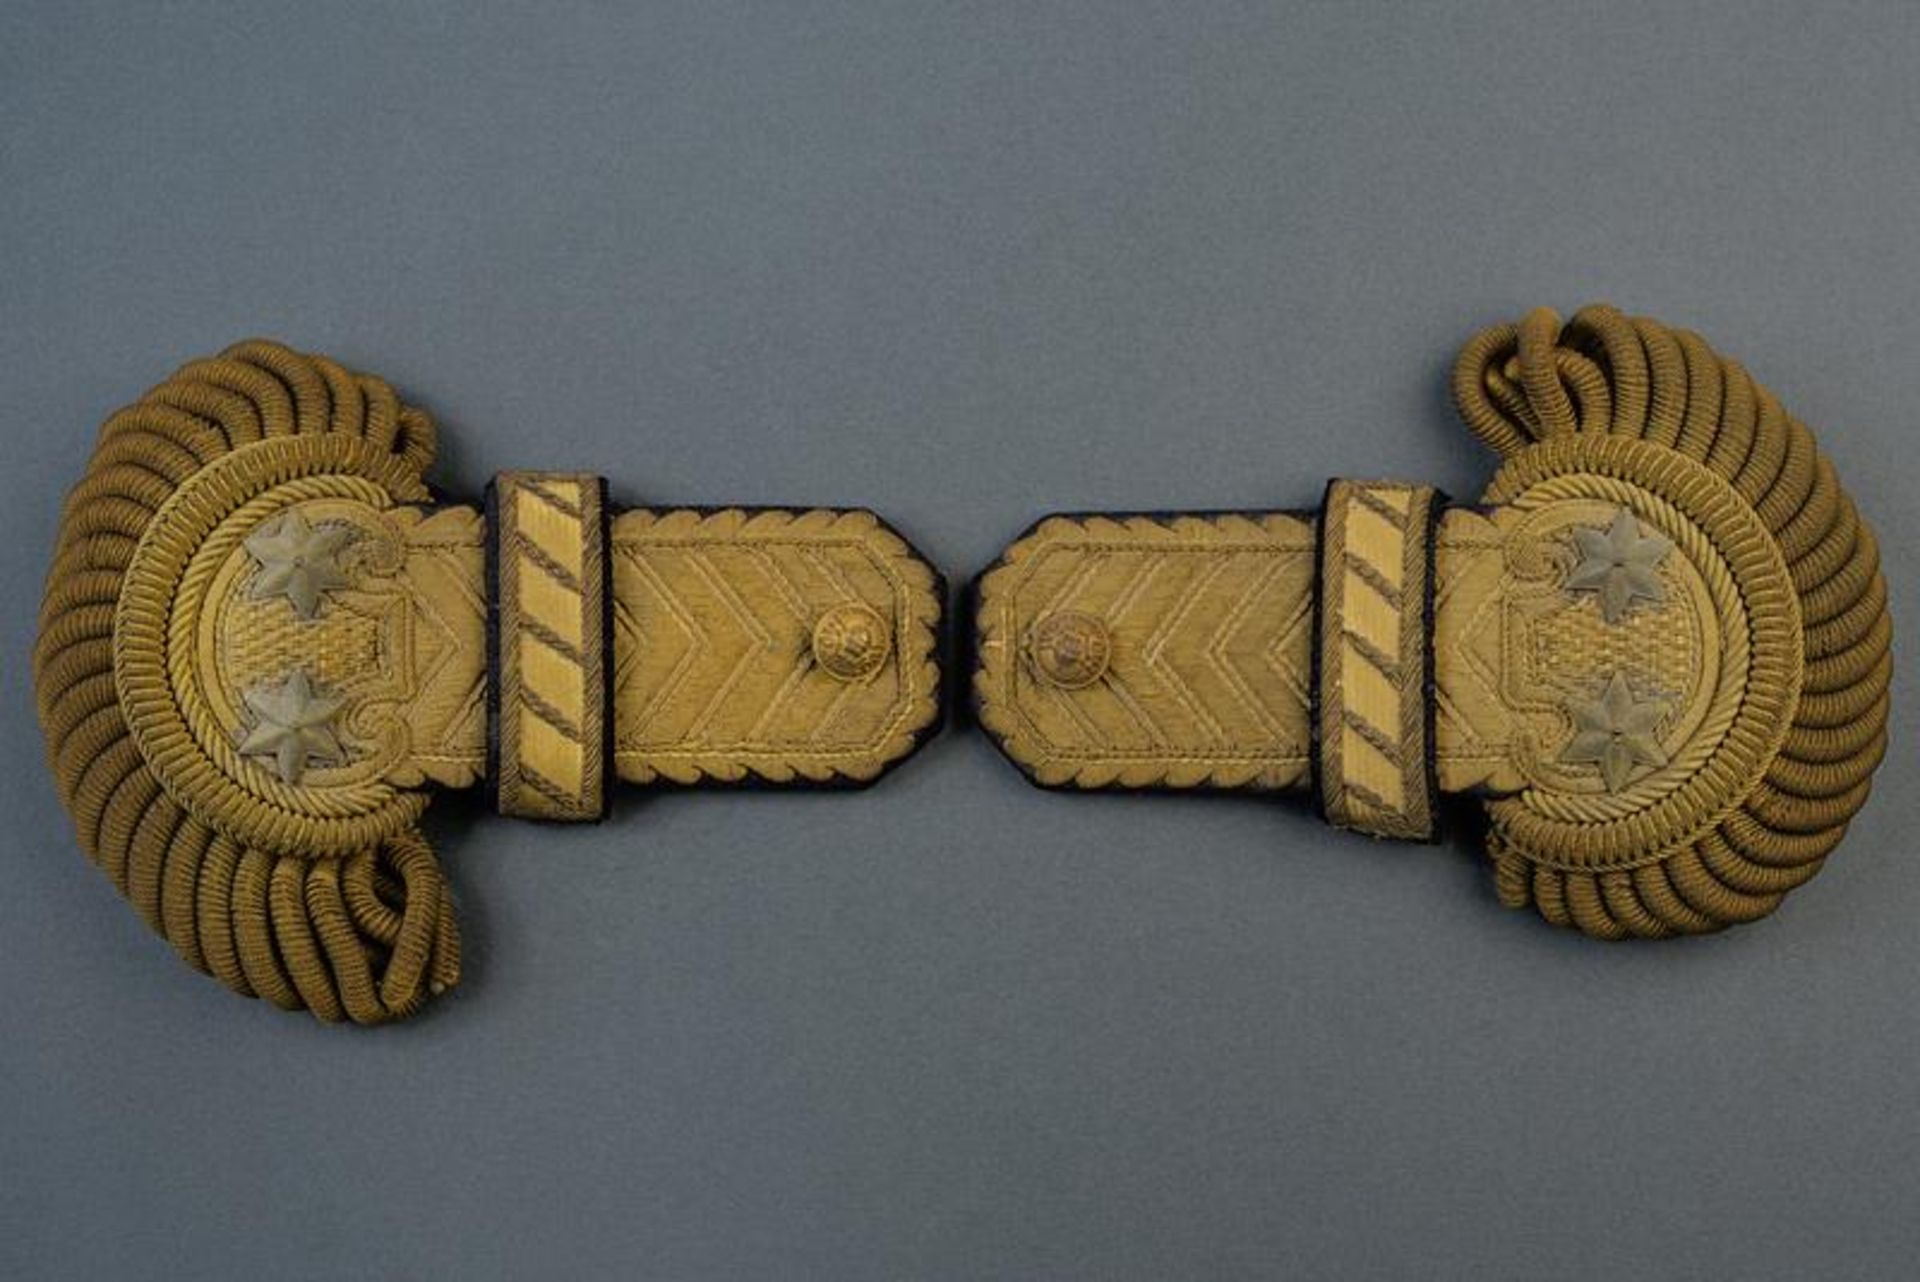 A rare pair of epaulets of the Commander of the Nobile Guard